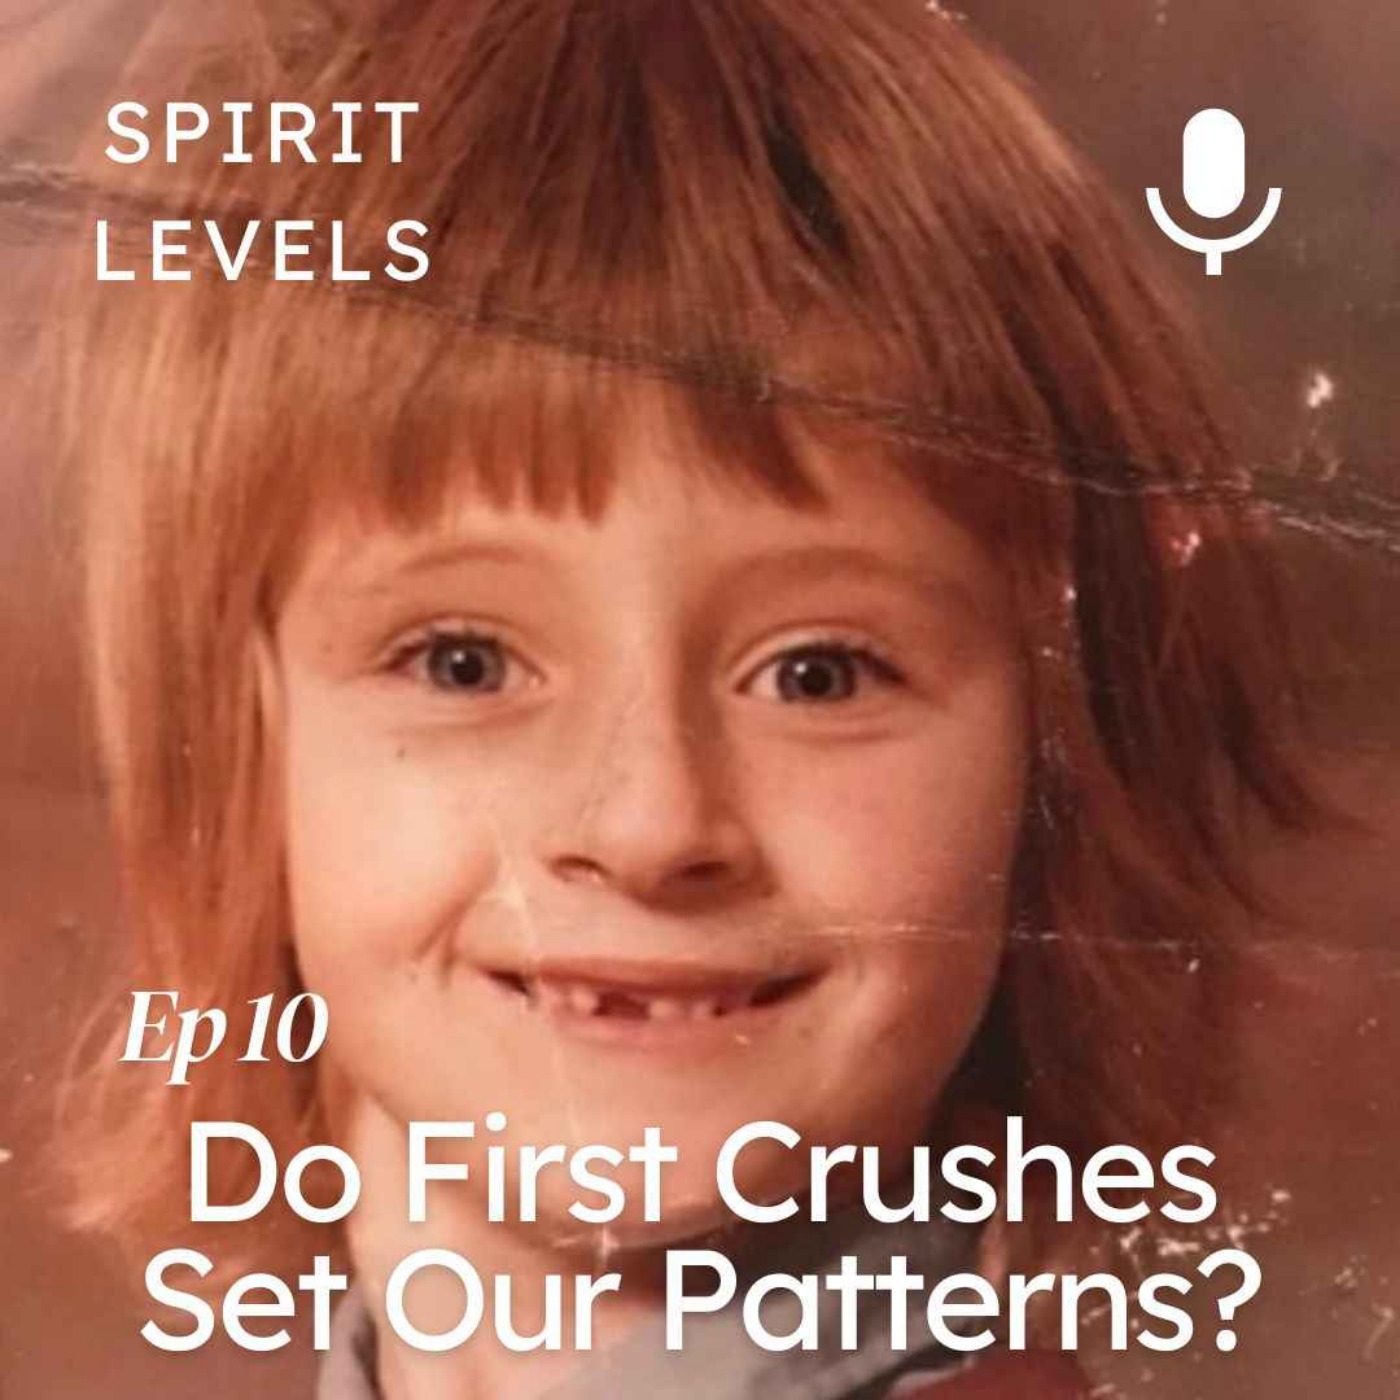 Do First Crushes Shape Our Patterns?